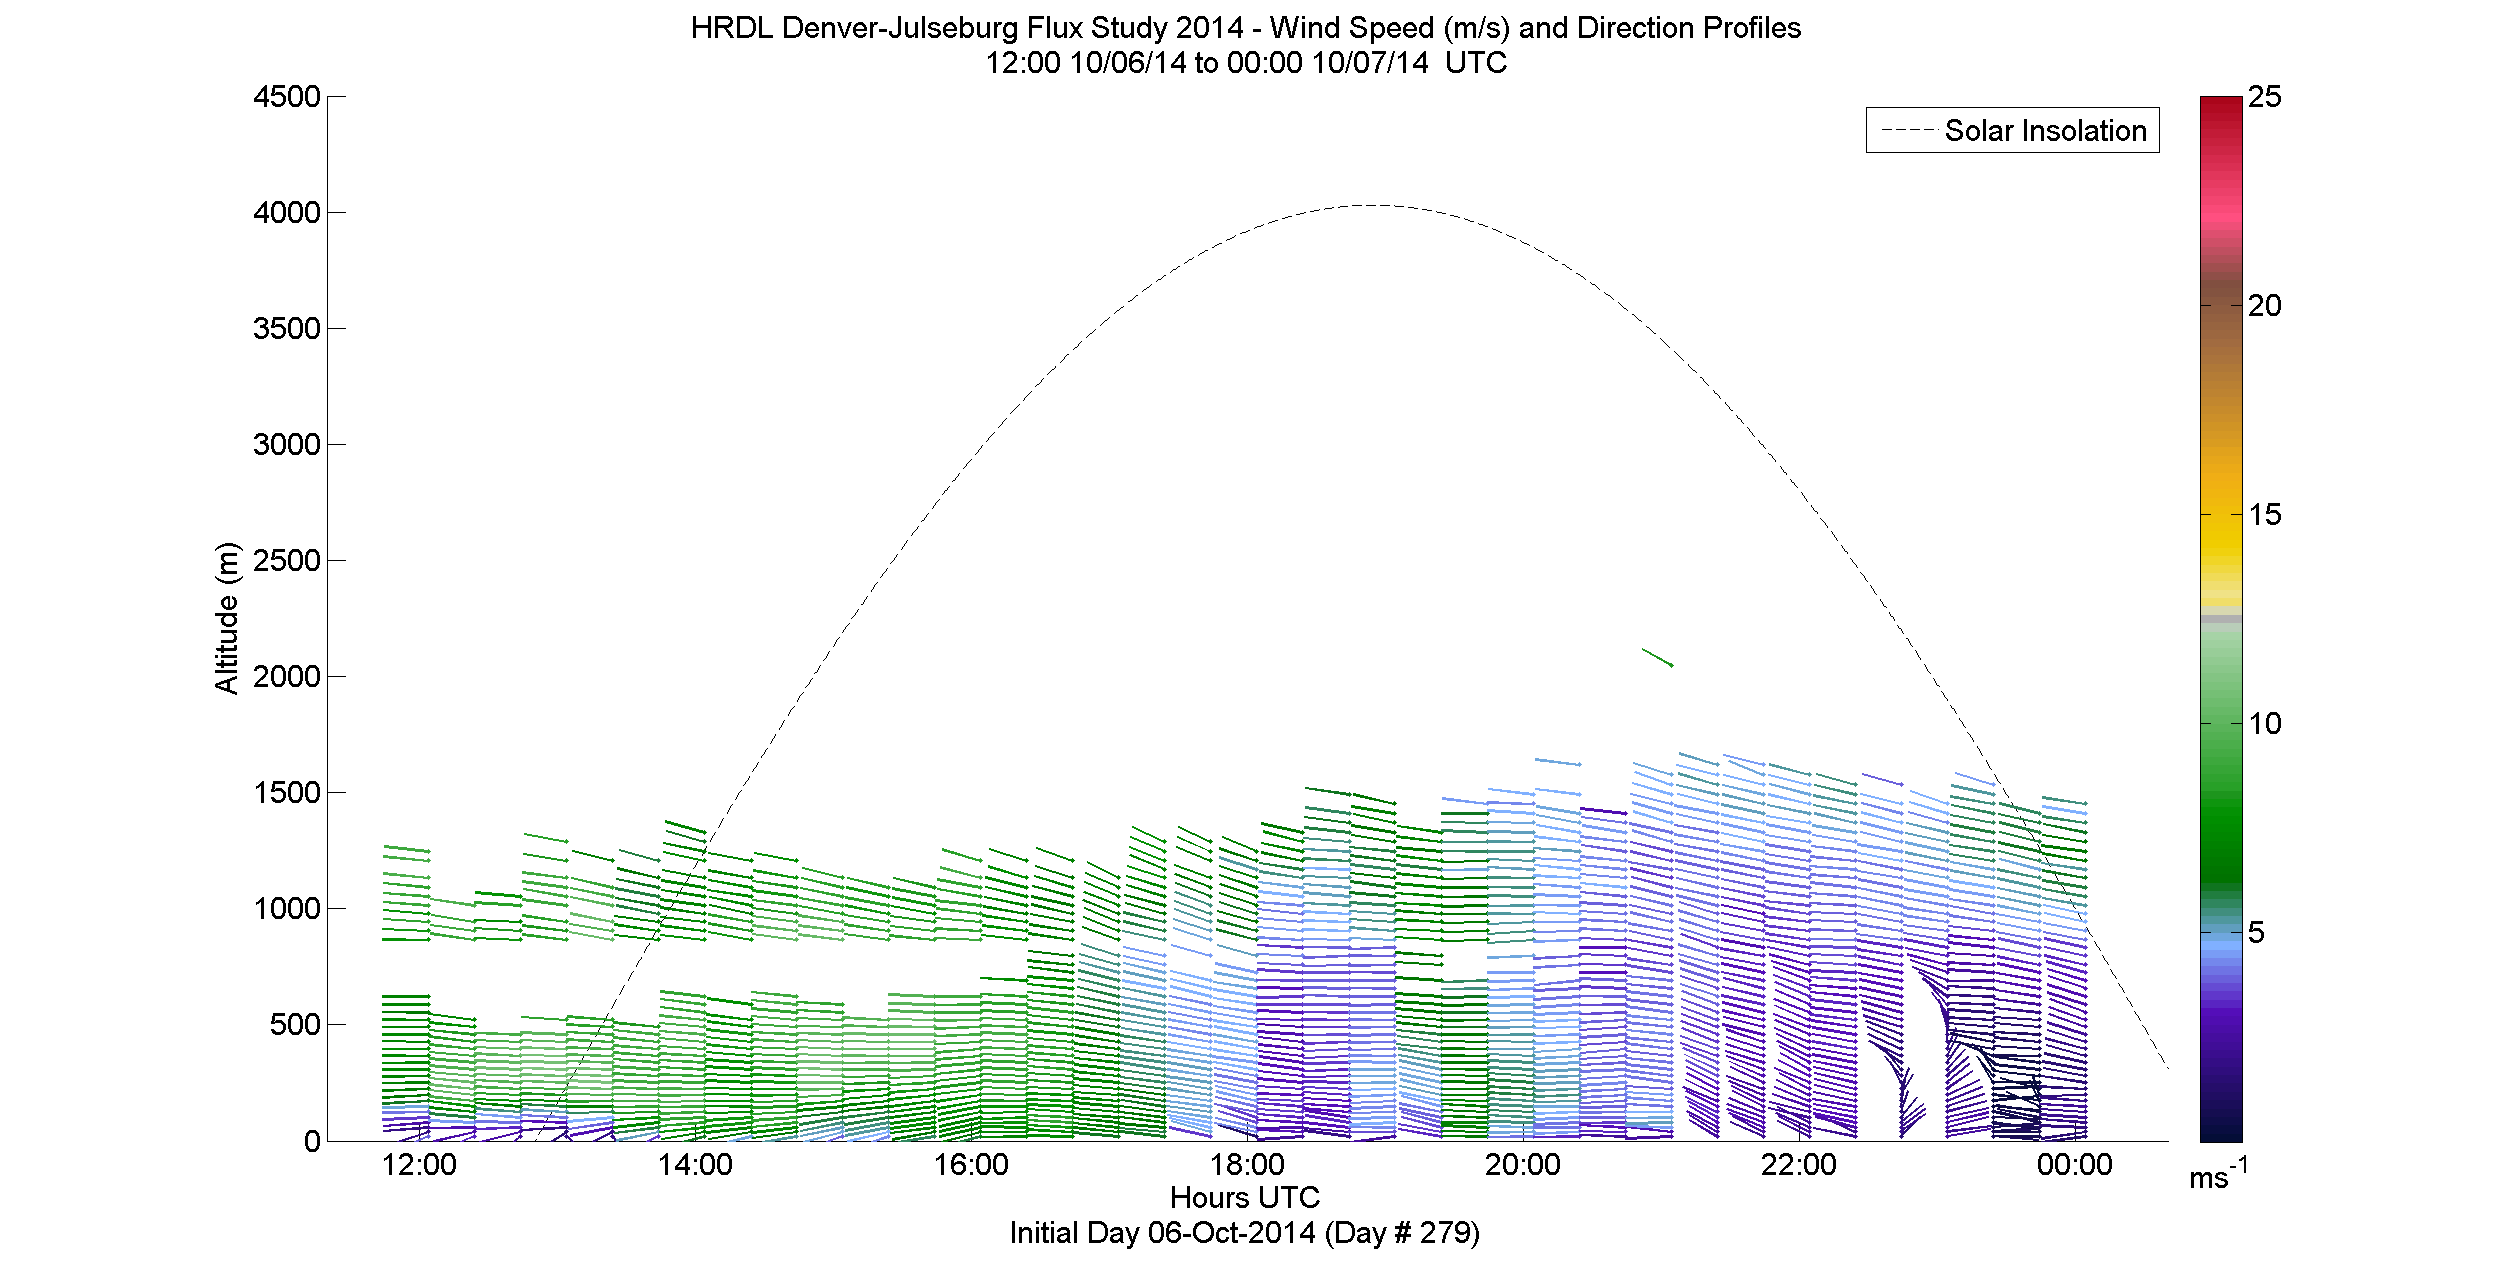 HRDL speed and direction profile - October 6 pm